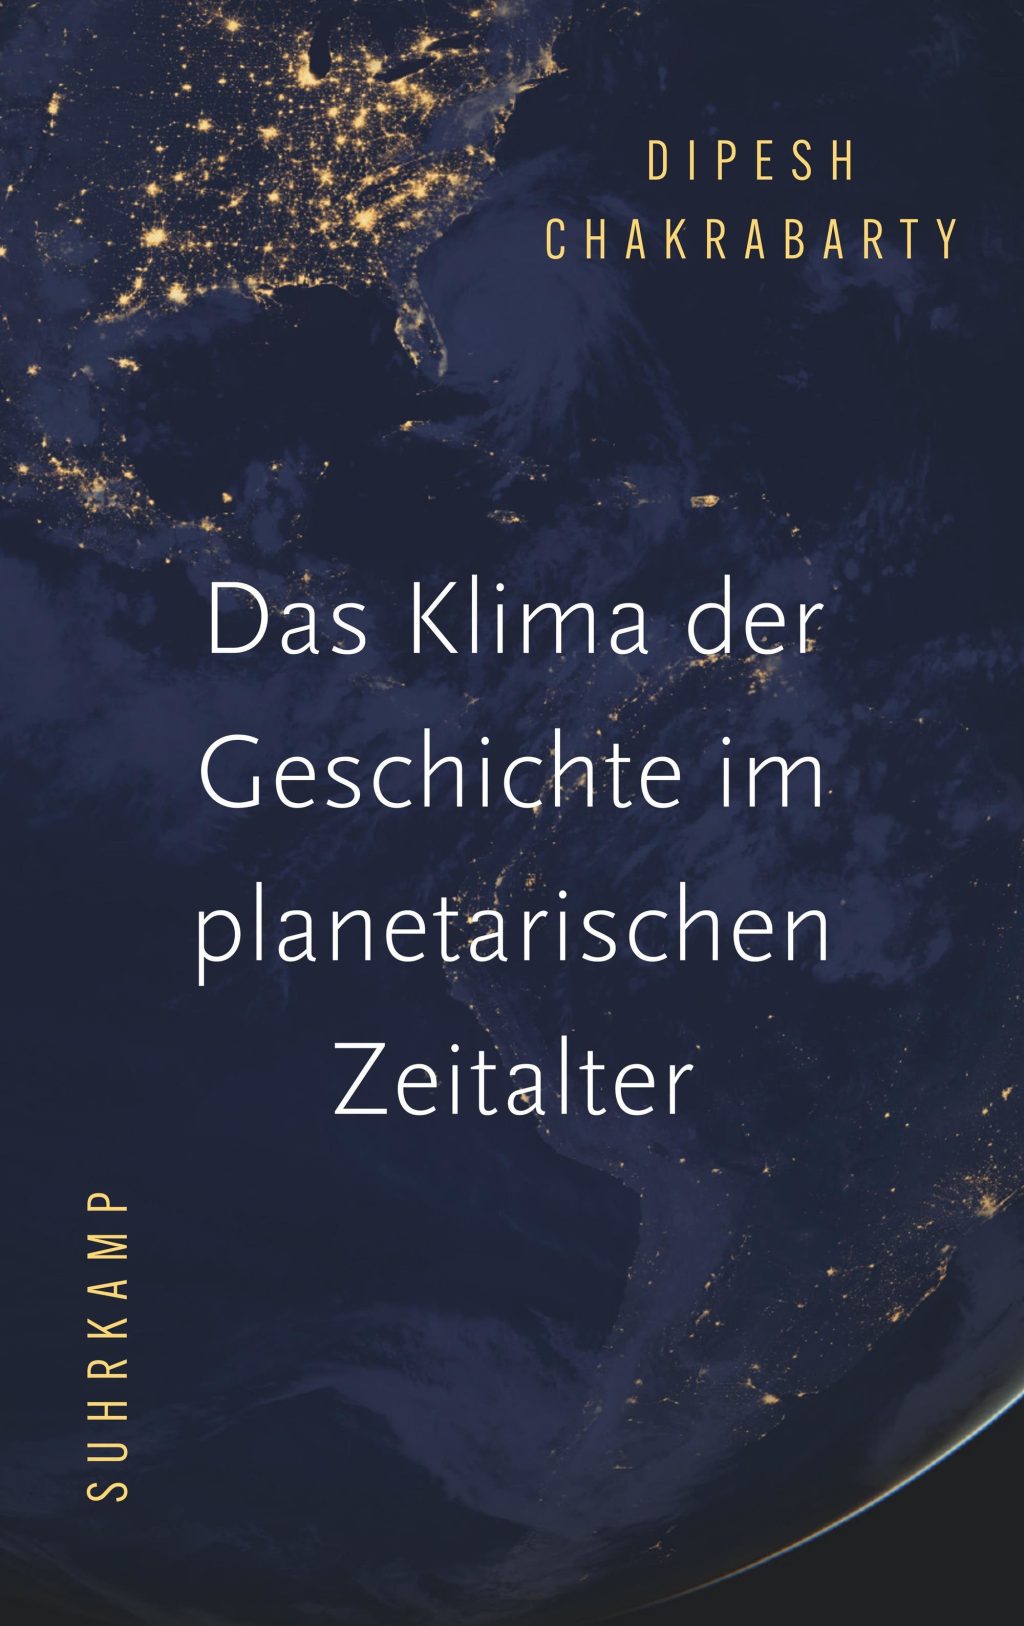 Book review on "Climate History in the Age of Planets"